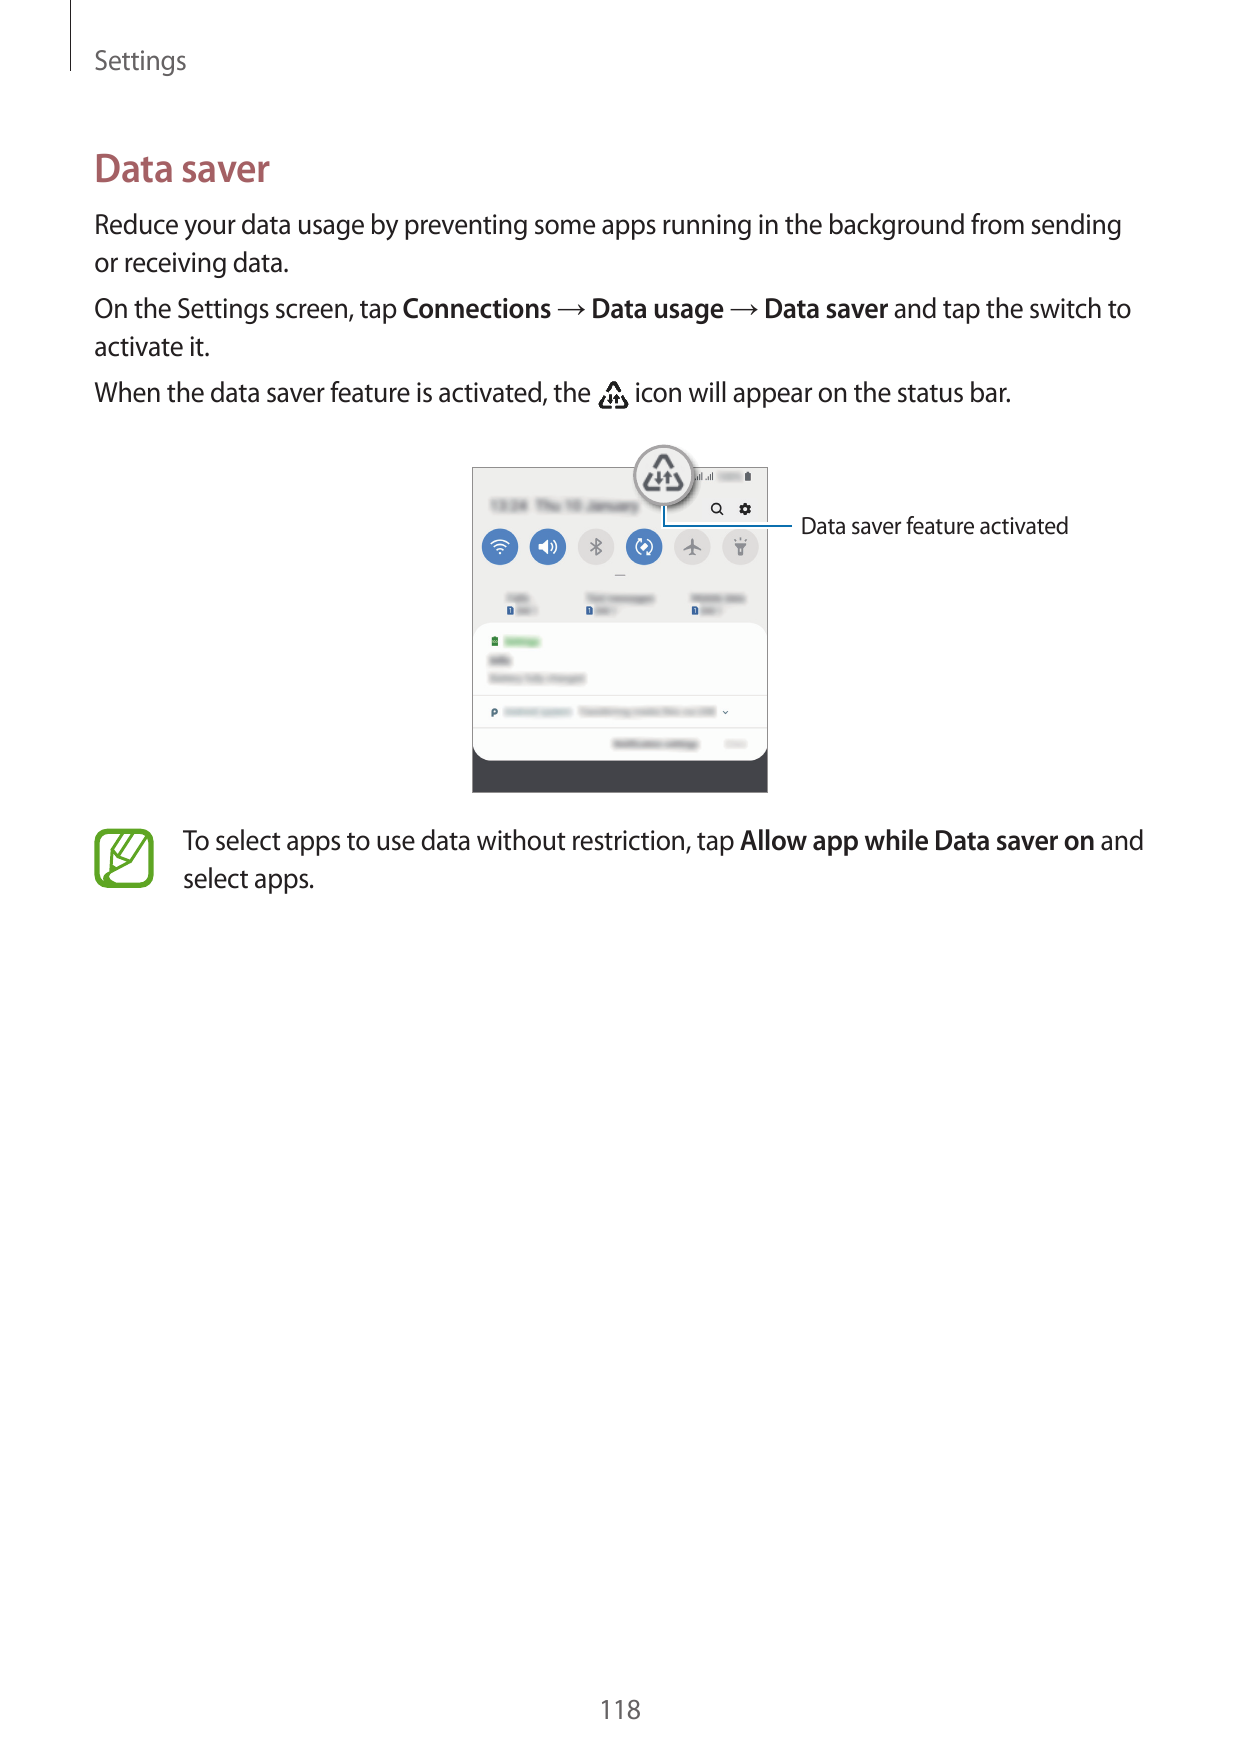 SettingsData saverReduce your data usage by preventing some apps running in the background from sendingor receiving data.On the 